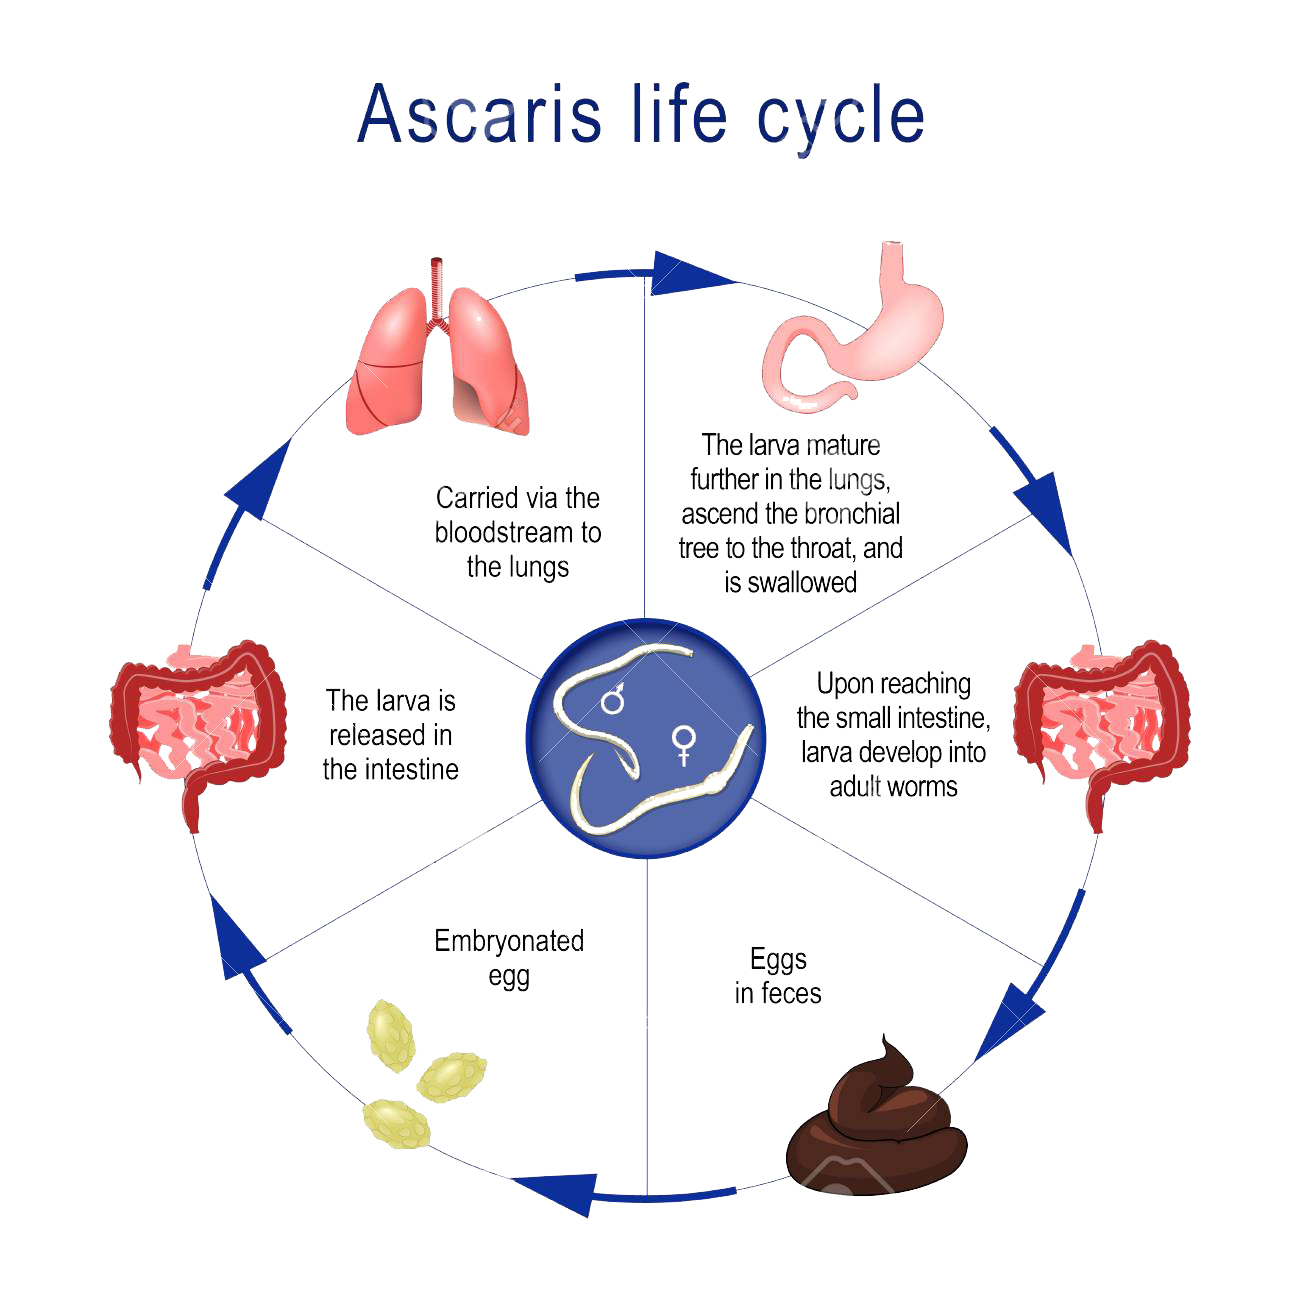 life cycle of Ascaris